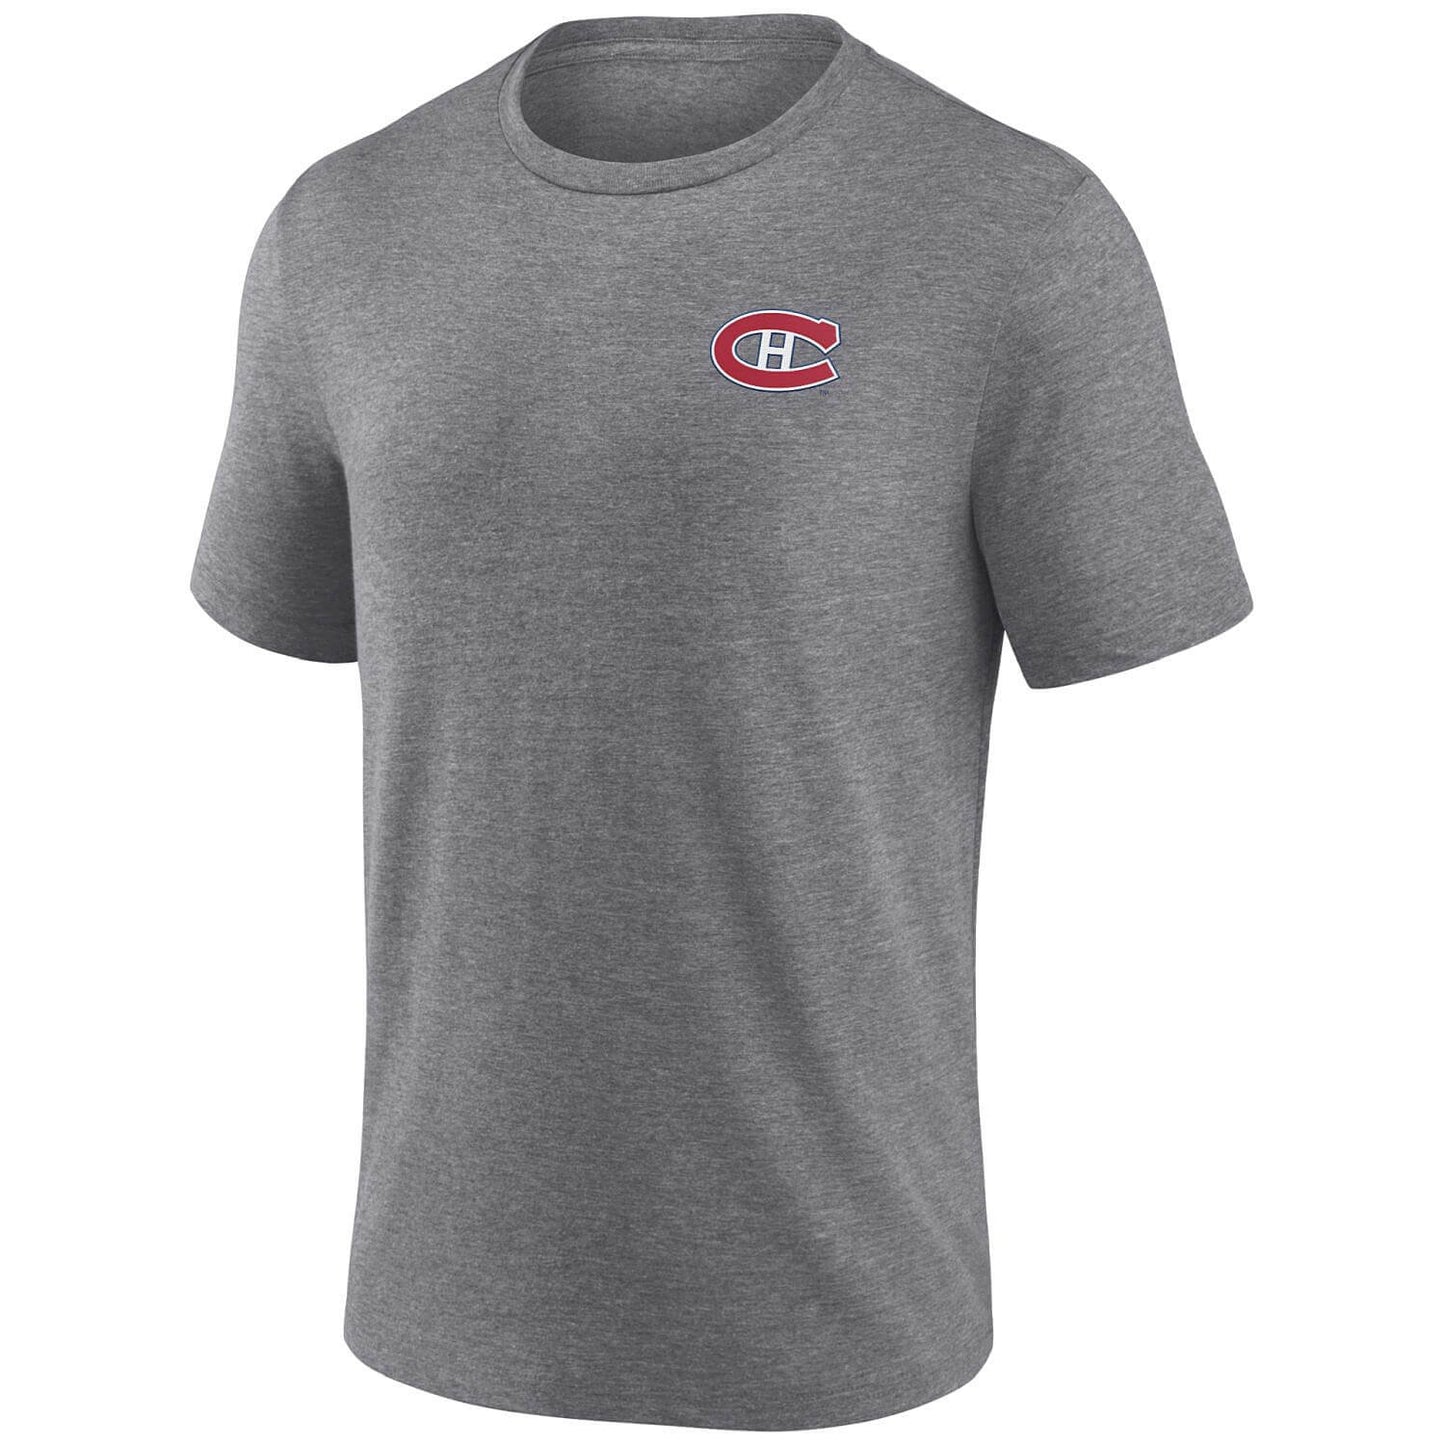 Fanatics NHL SS Triblend Tee Montreal Canadiens Athletic Gray Heather